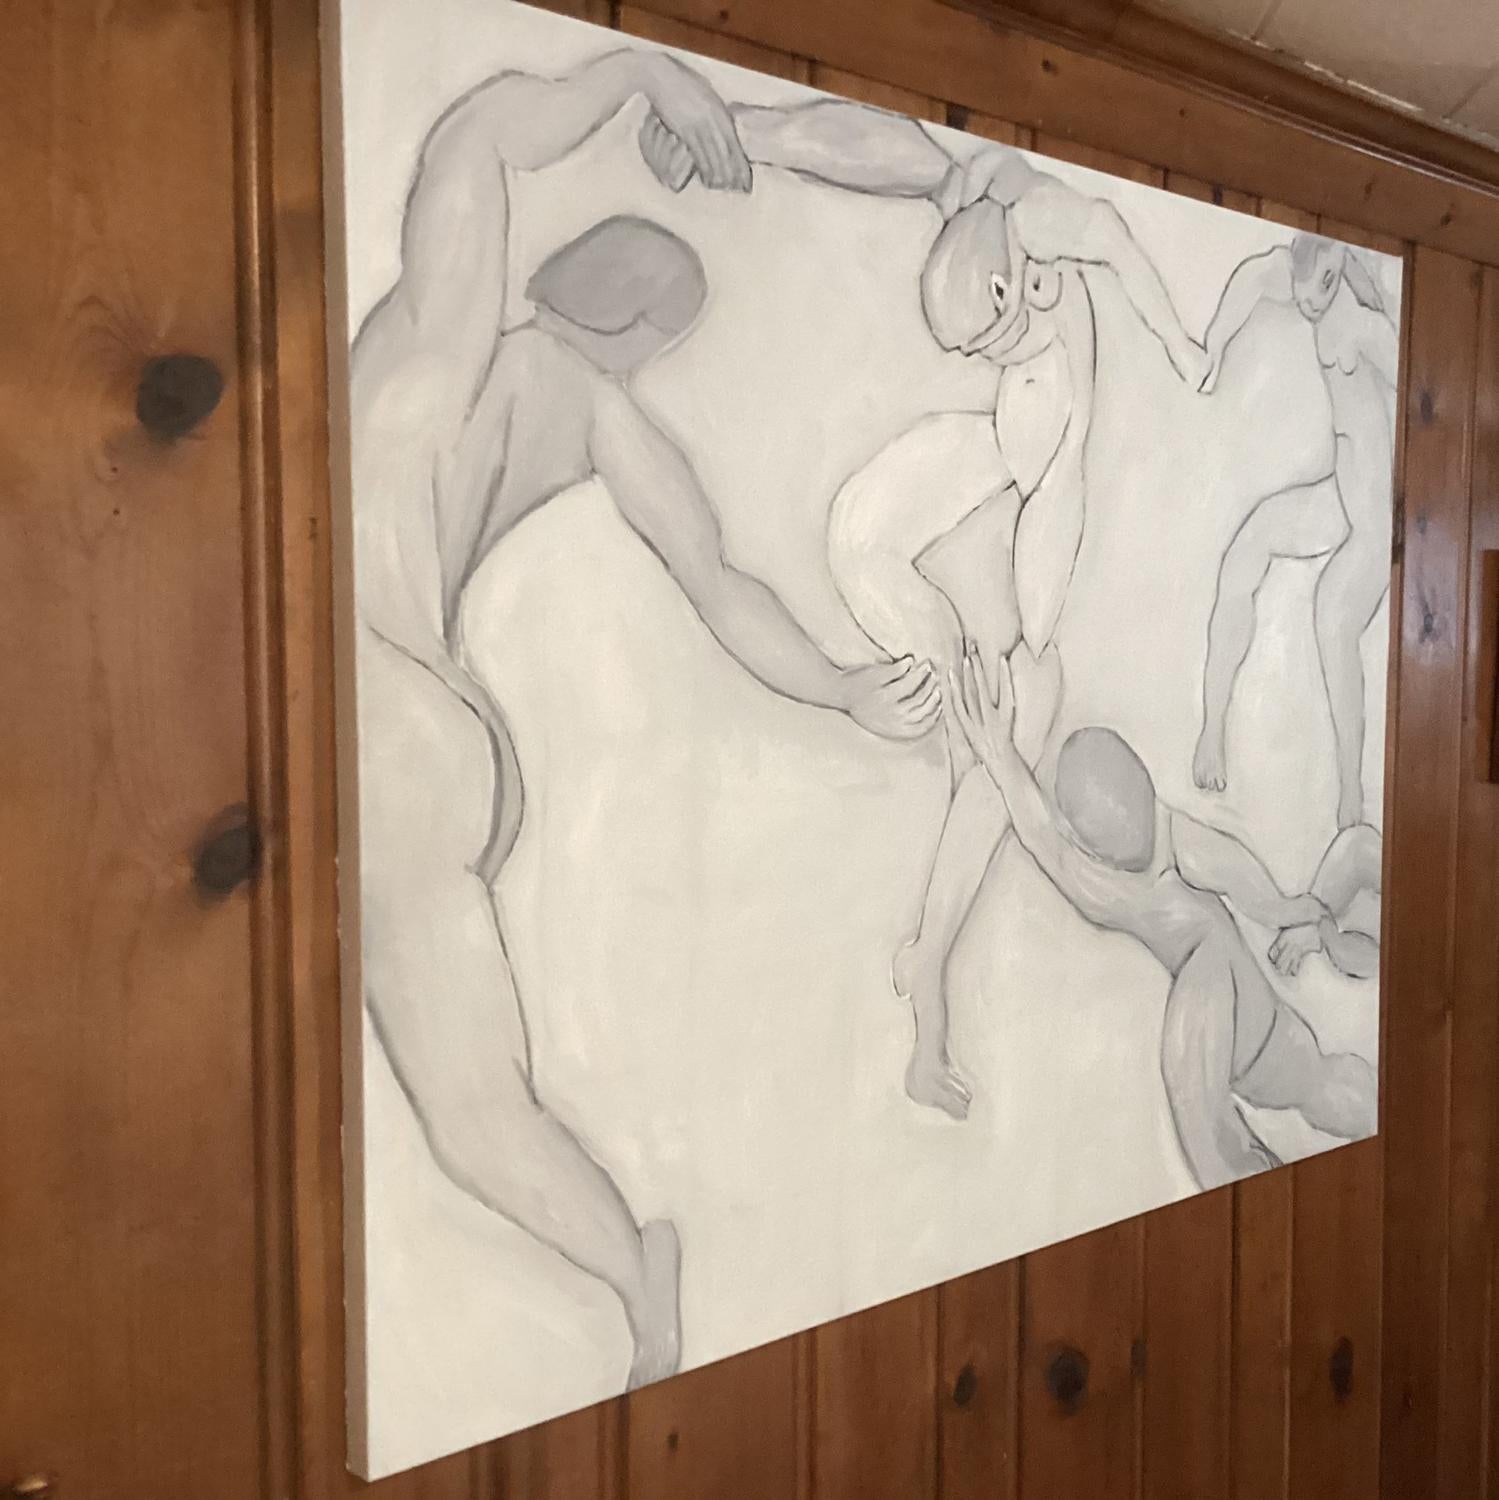 Katherine Borkowski-Byrne’s ‘Ghosts of Matisse” is a mixed media painting on canvas 60 x 48 x 1.5 inches with spontaneous brushwork in a monochrommatic scale of black and white mixed with charcoal. This painting was inspired by standing spellbound